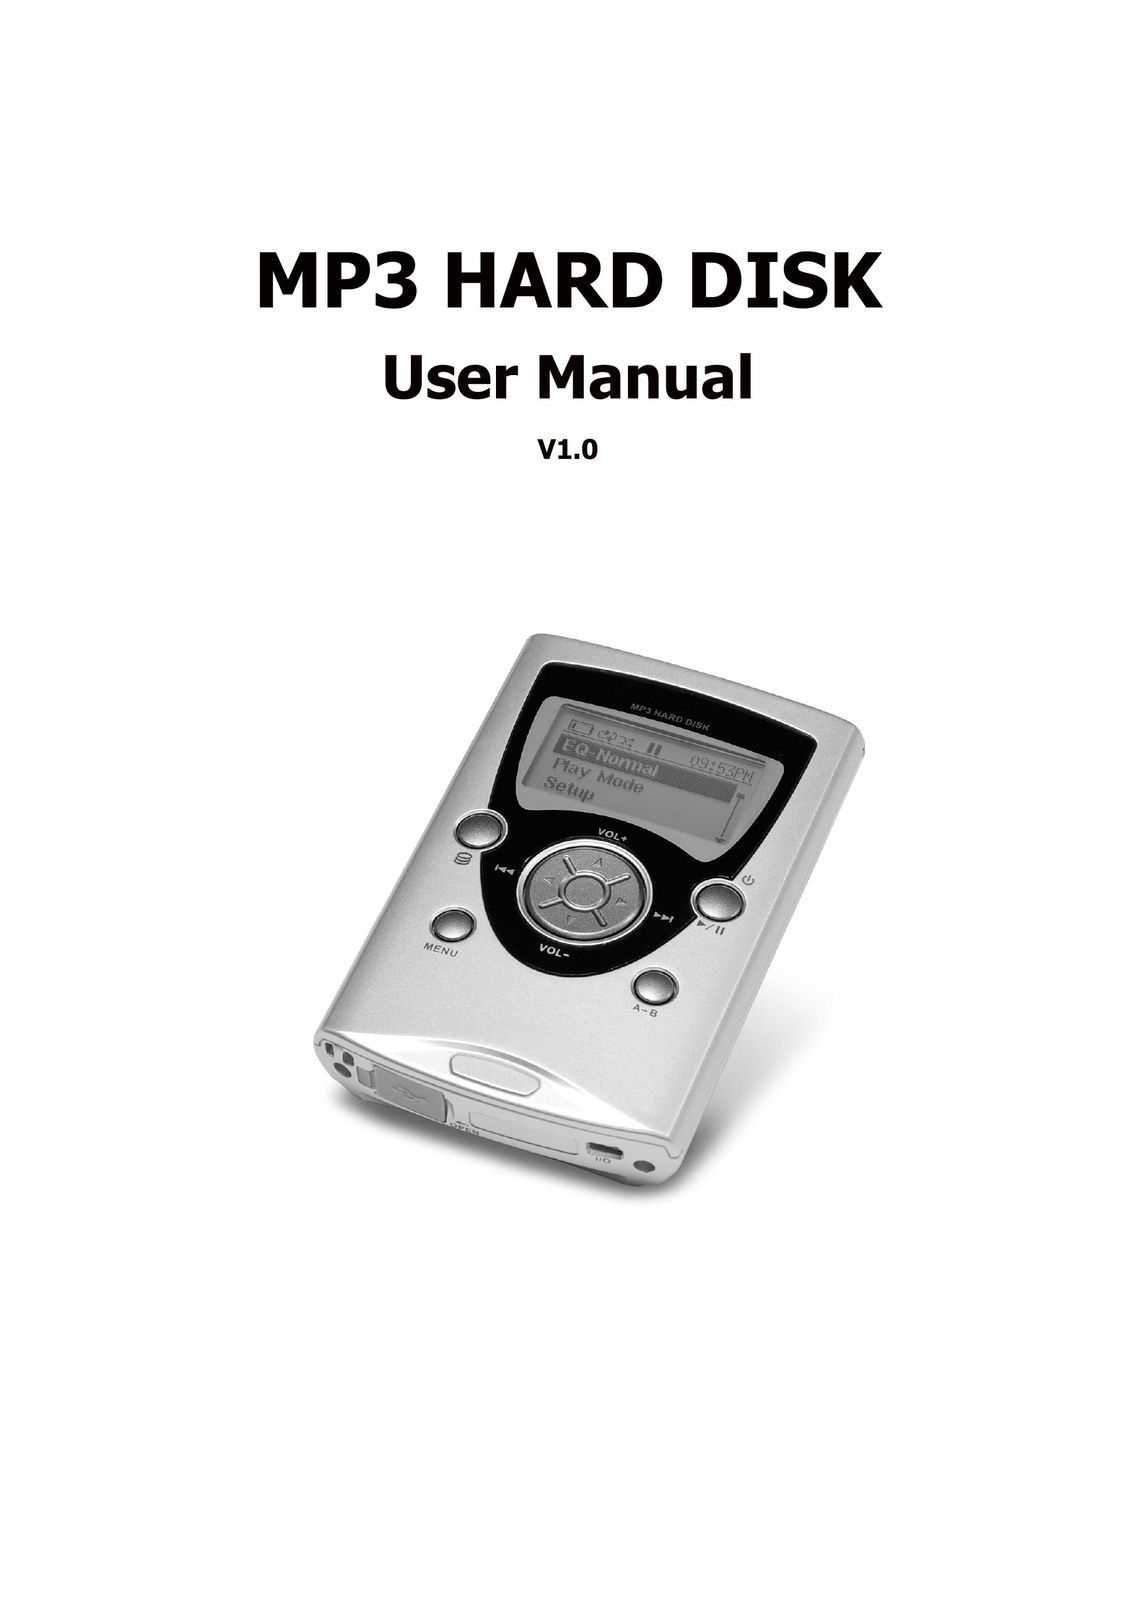 ATMT MP180 MP3 Player User Manual